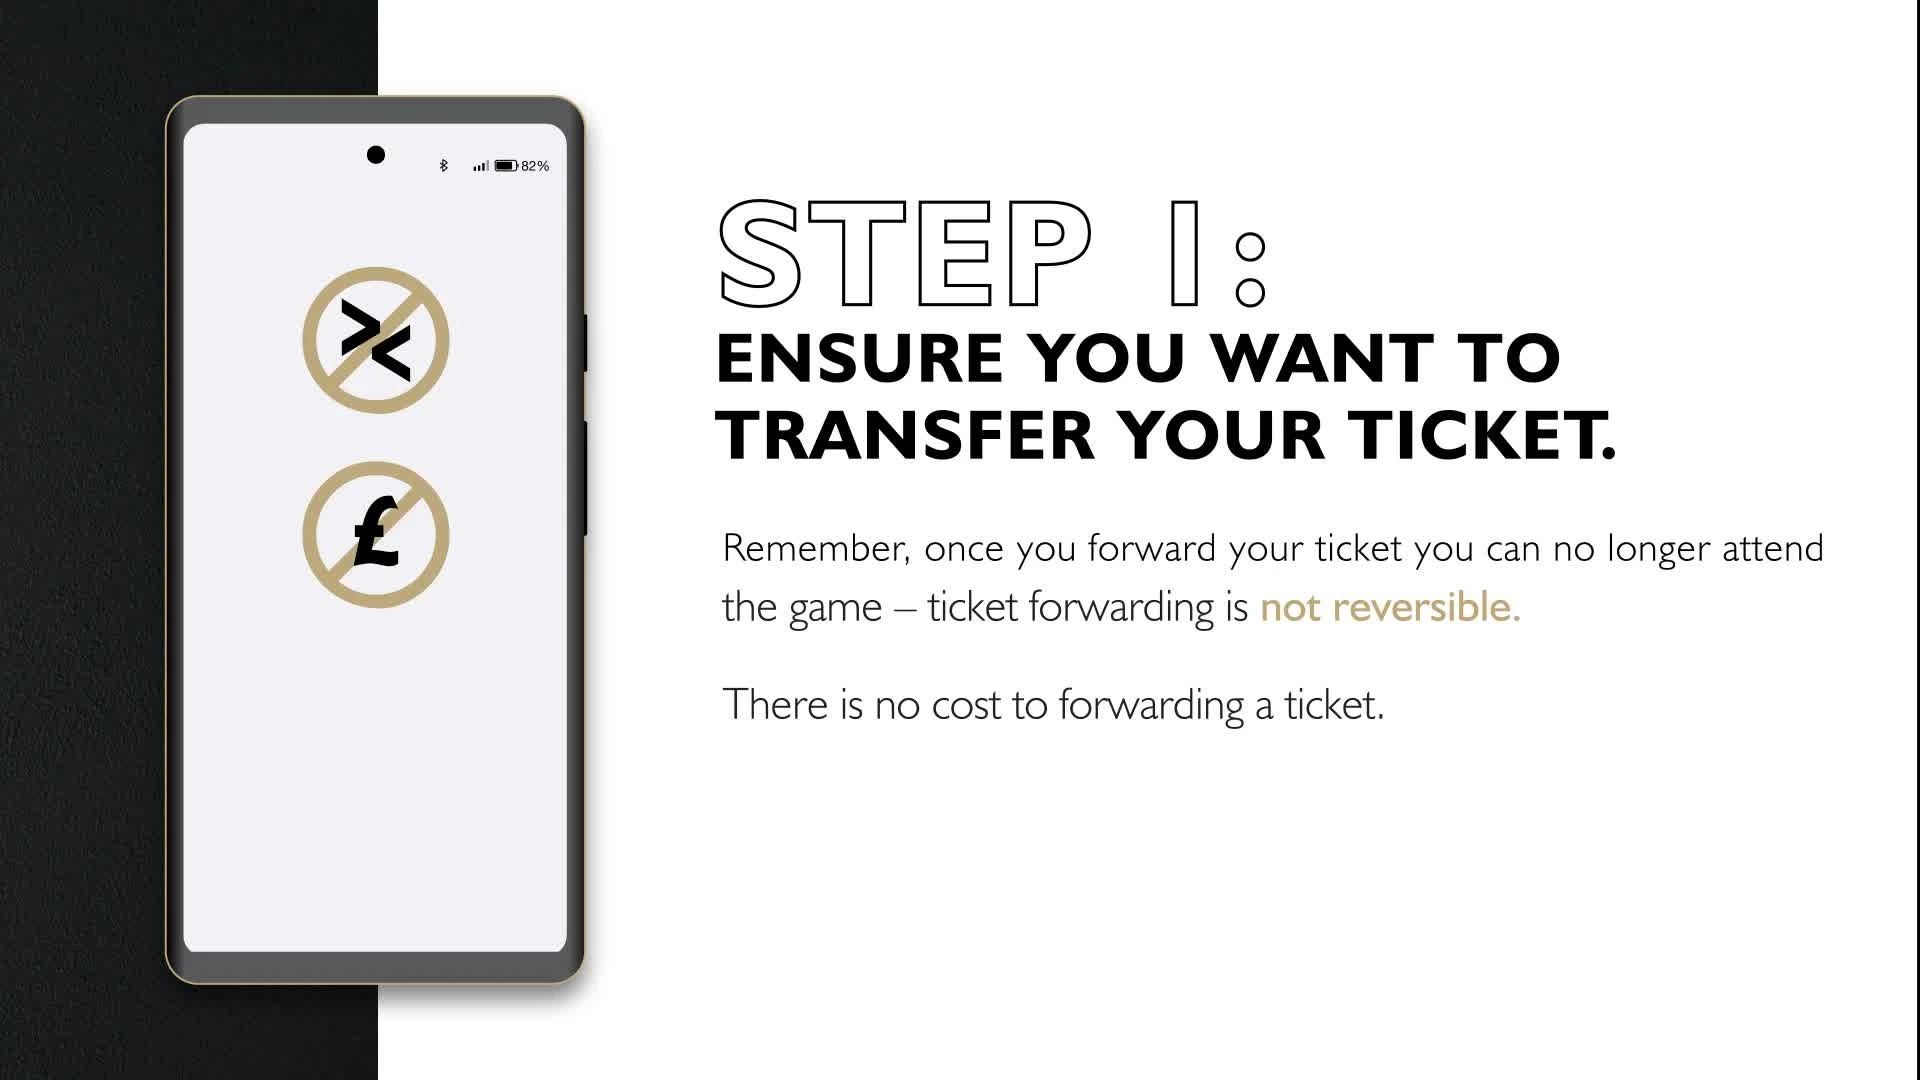 [Image] Transferring your ticket